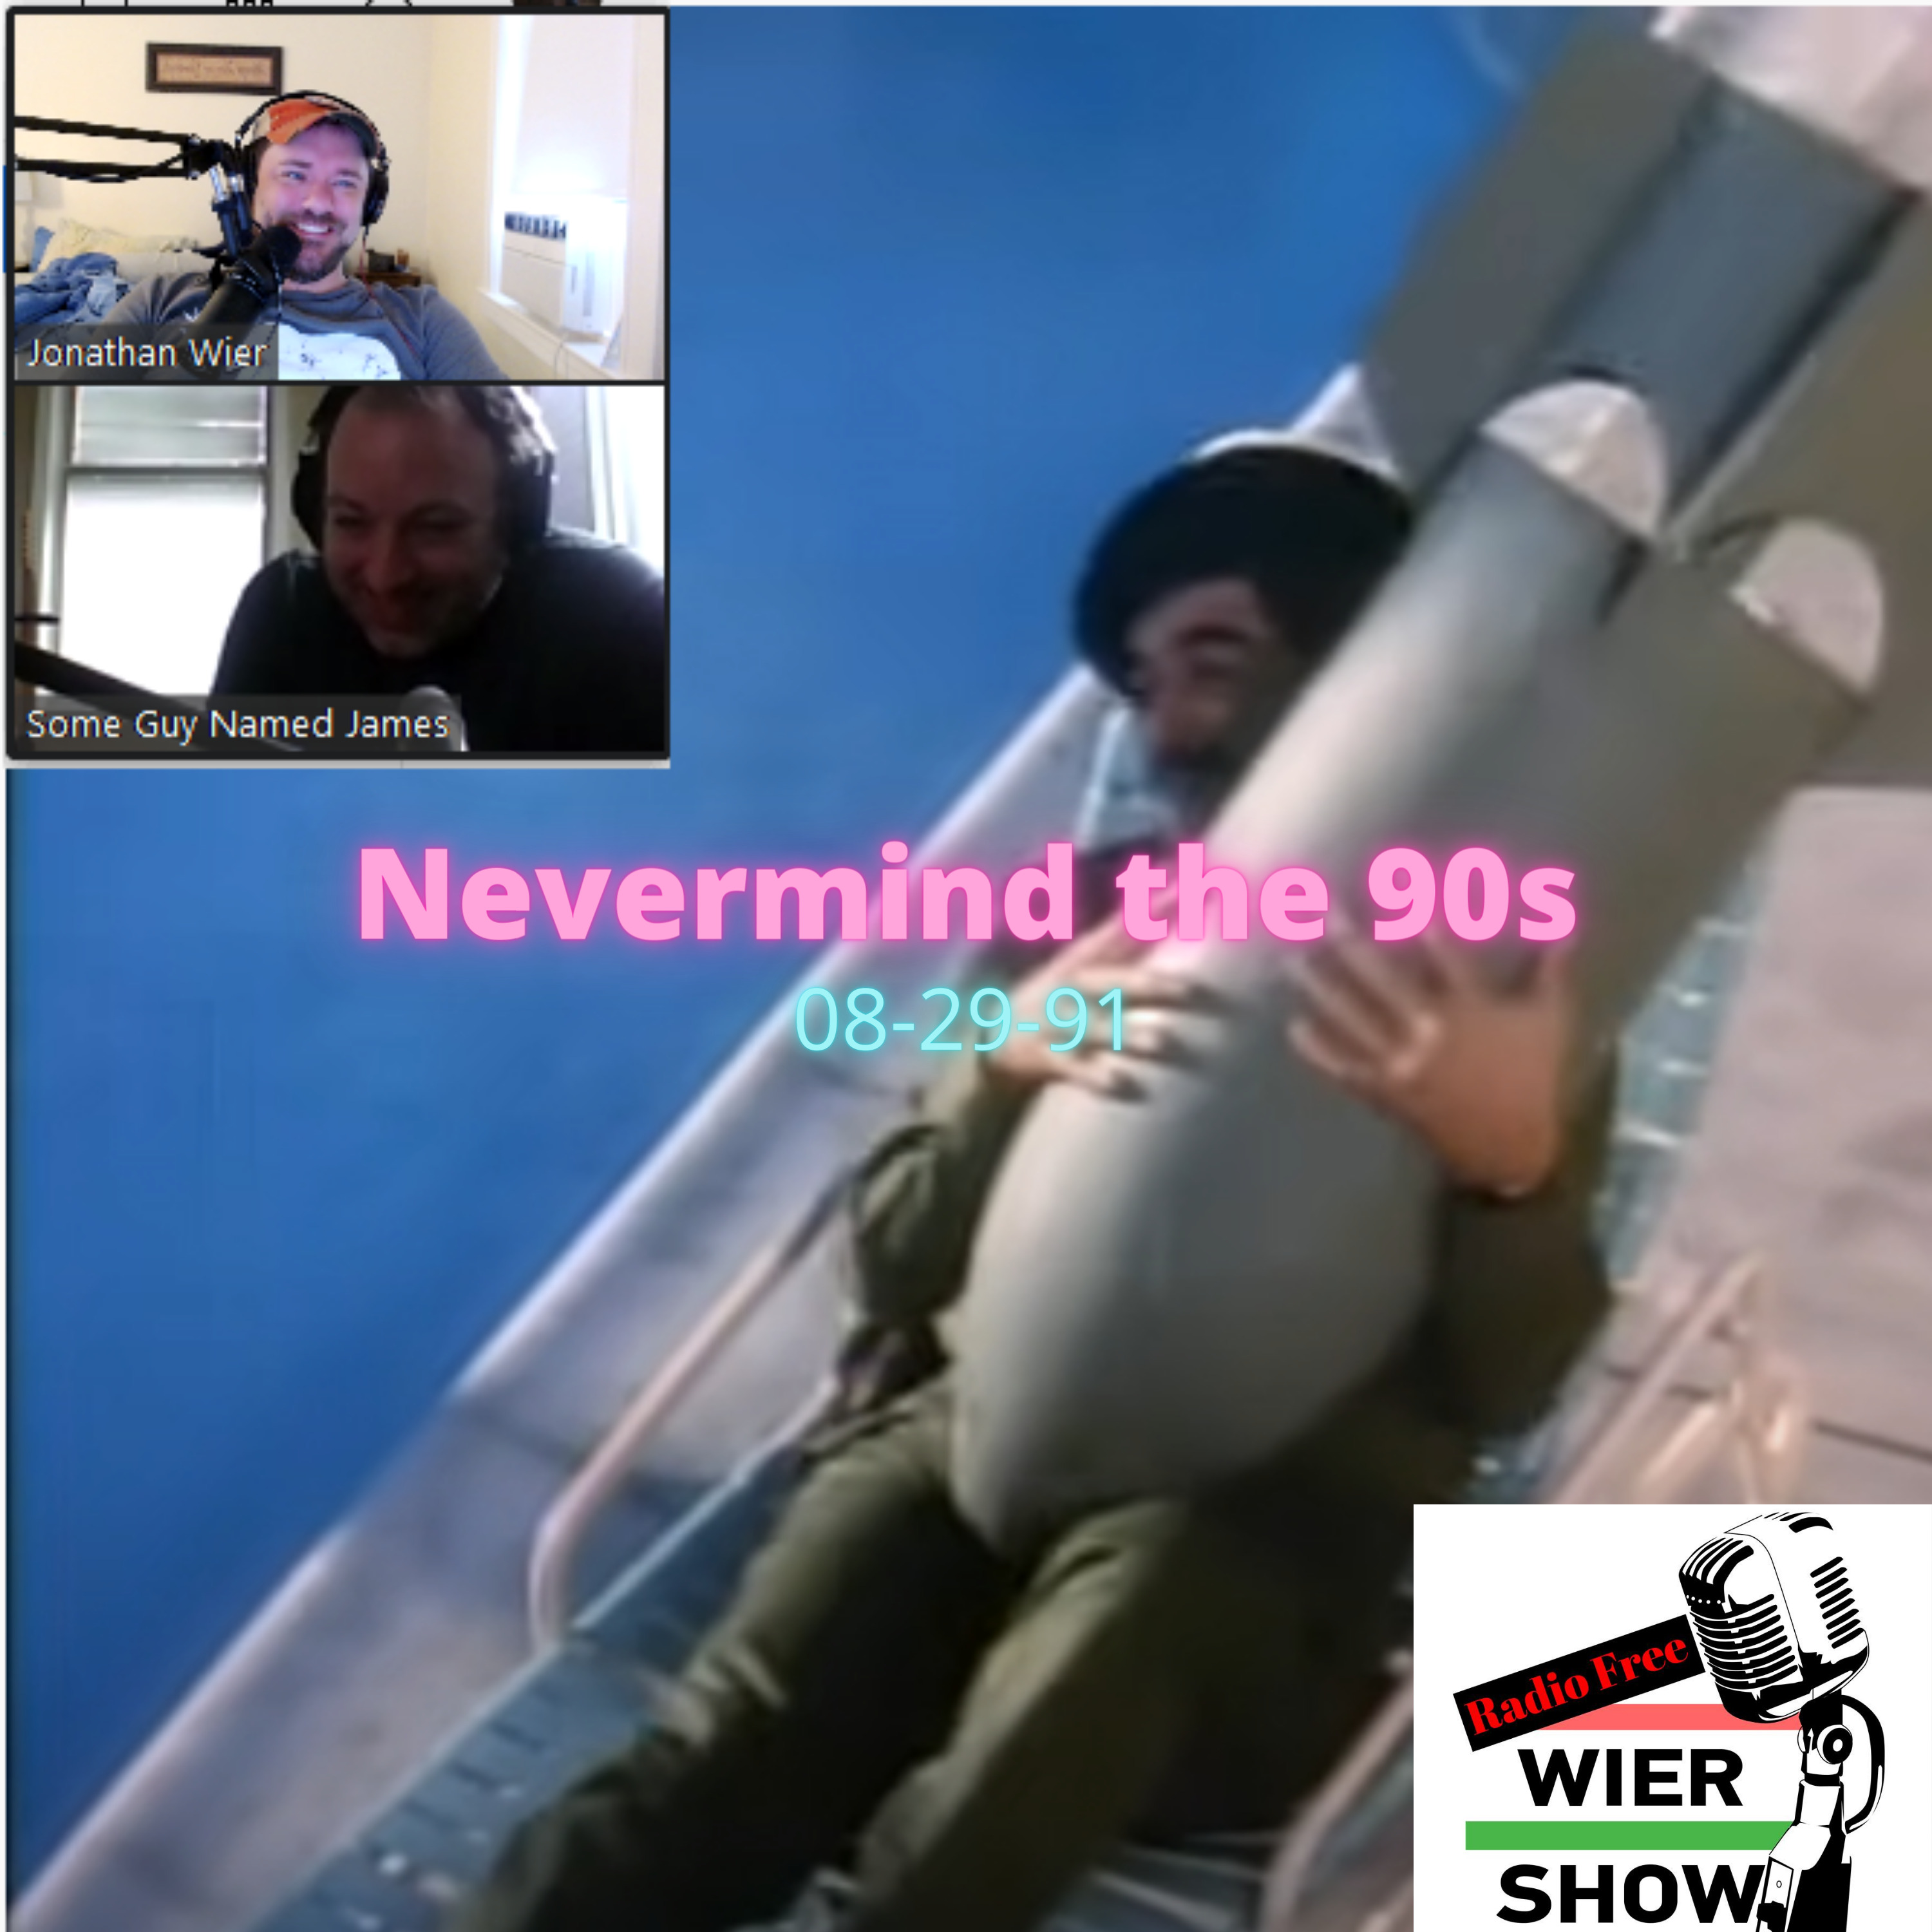 Nevermind the 90s: 08-29-91